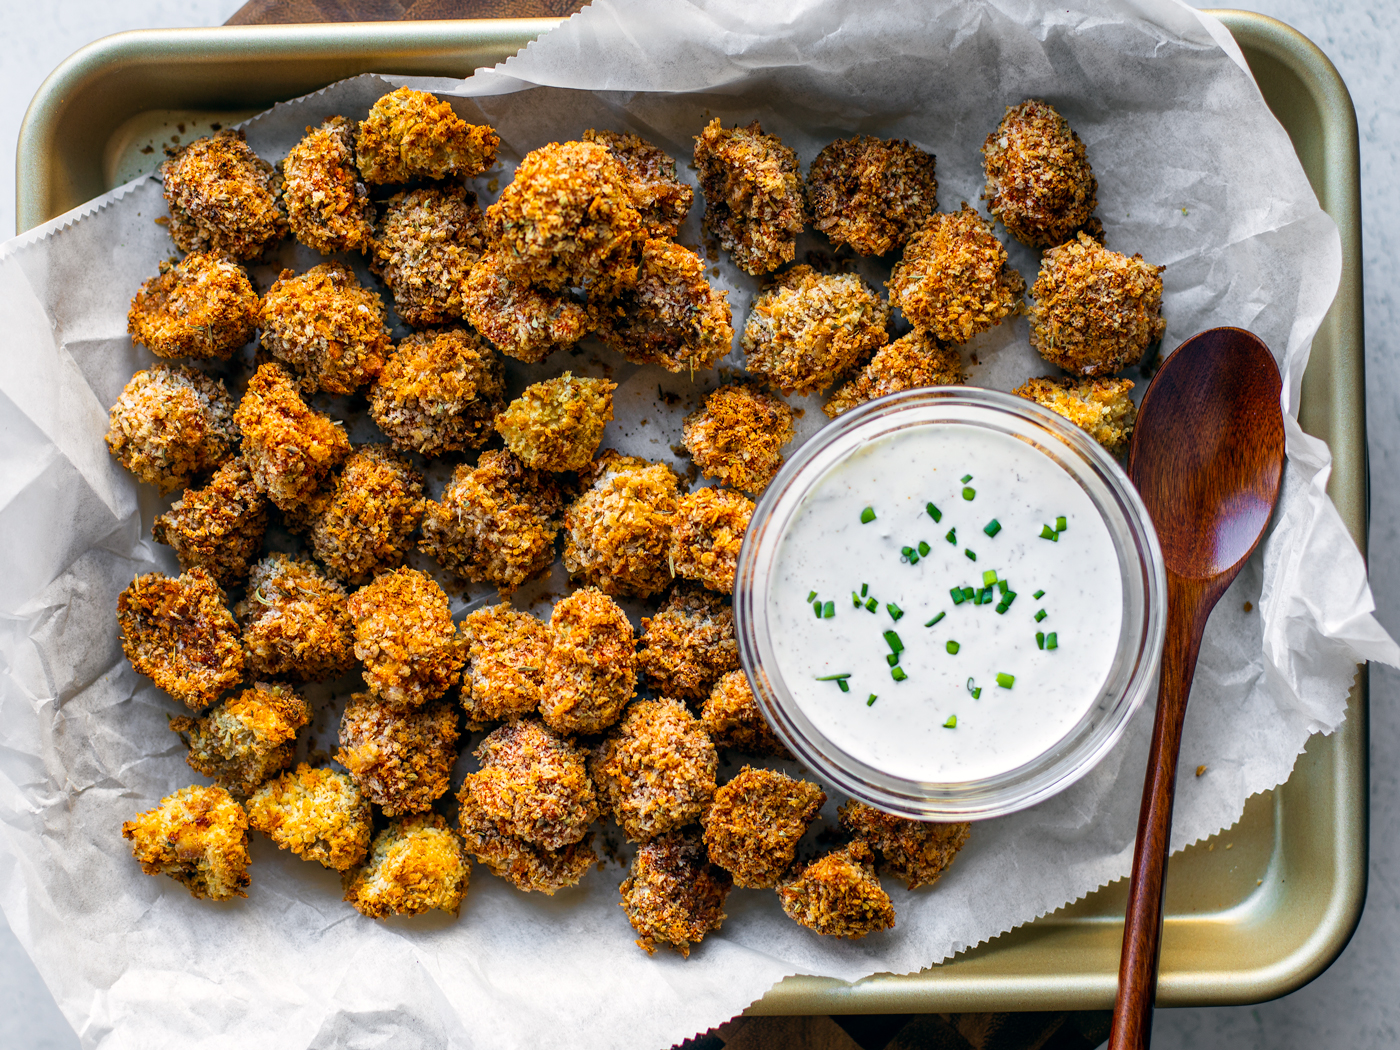 Baking sheet full of breaded fried mushrooms with a small bowl of ranch dip.